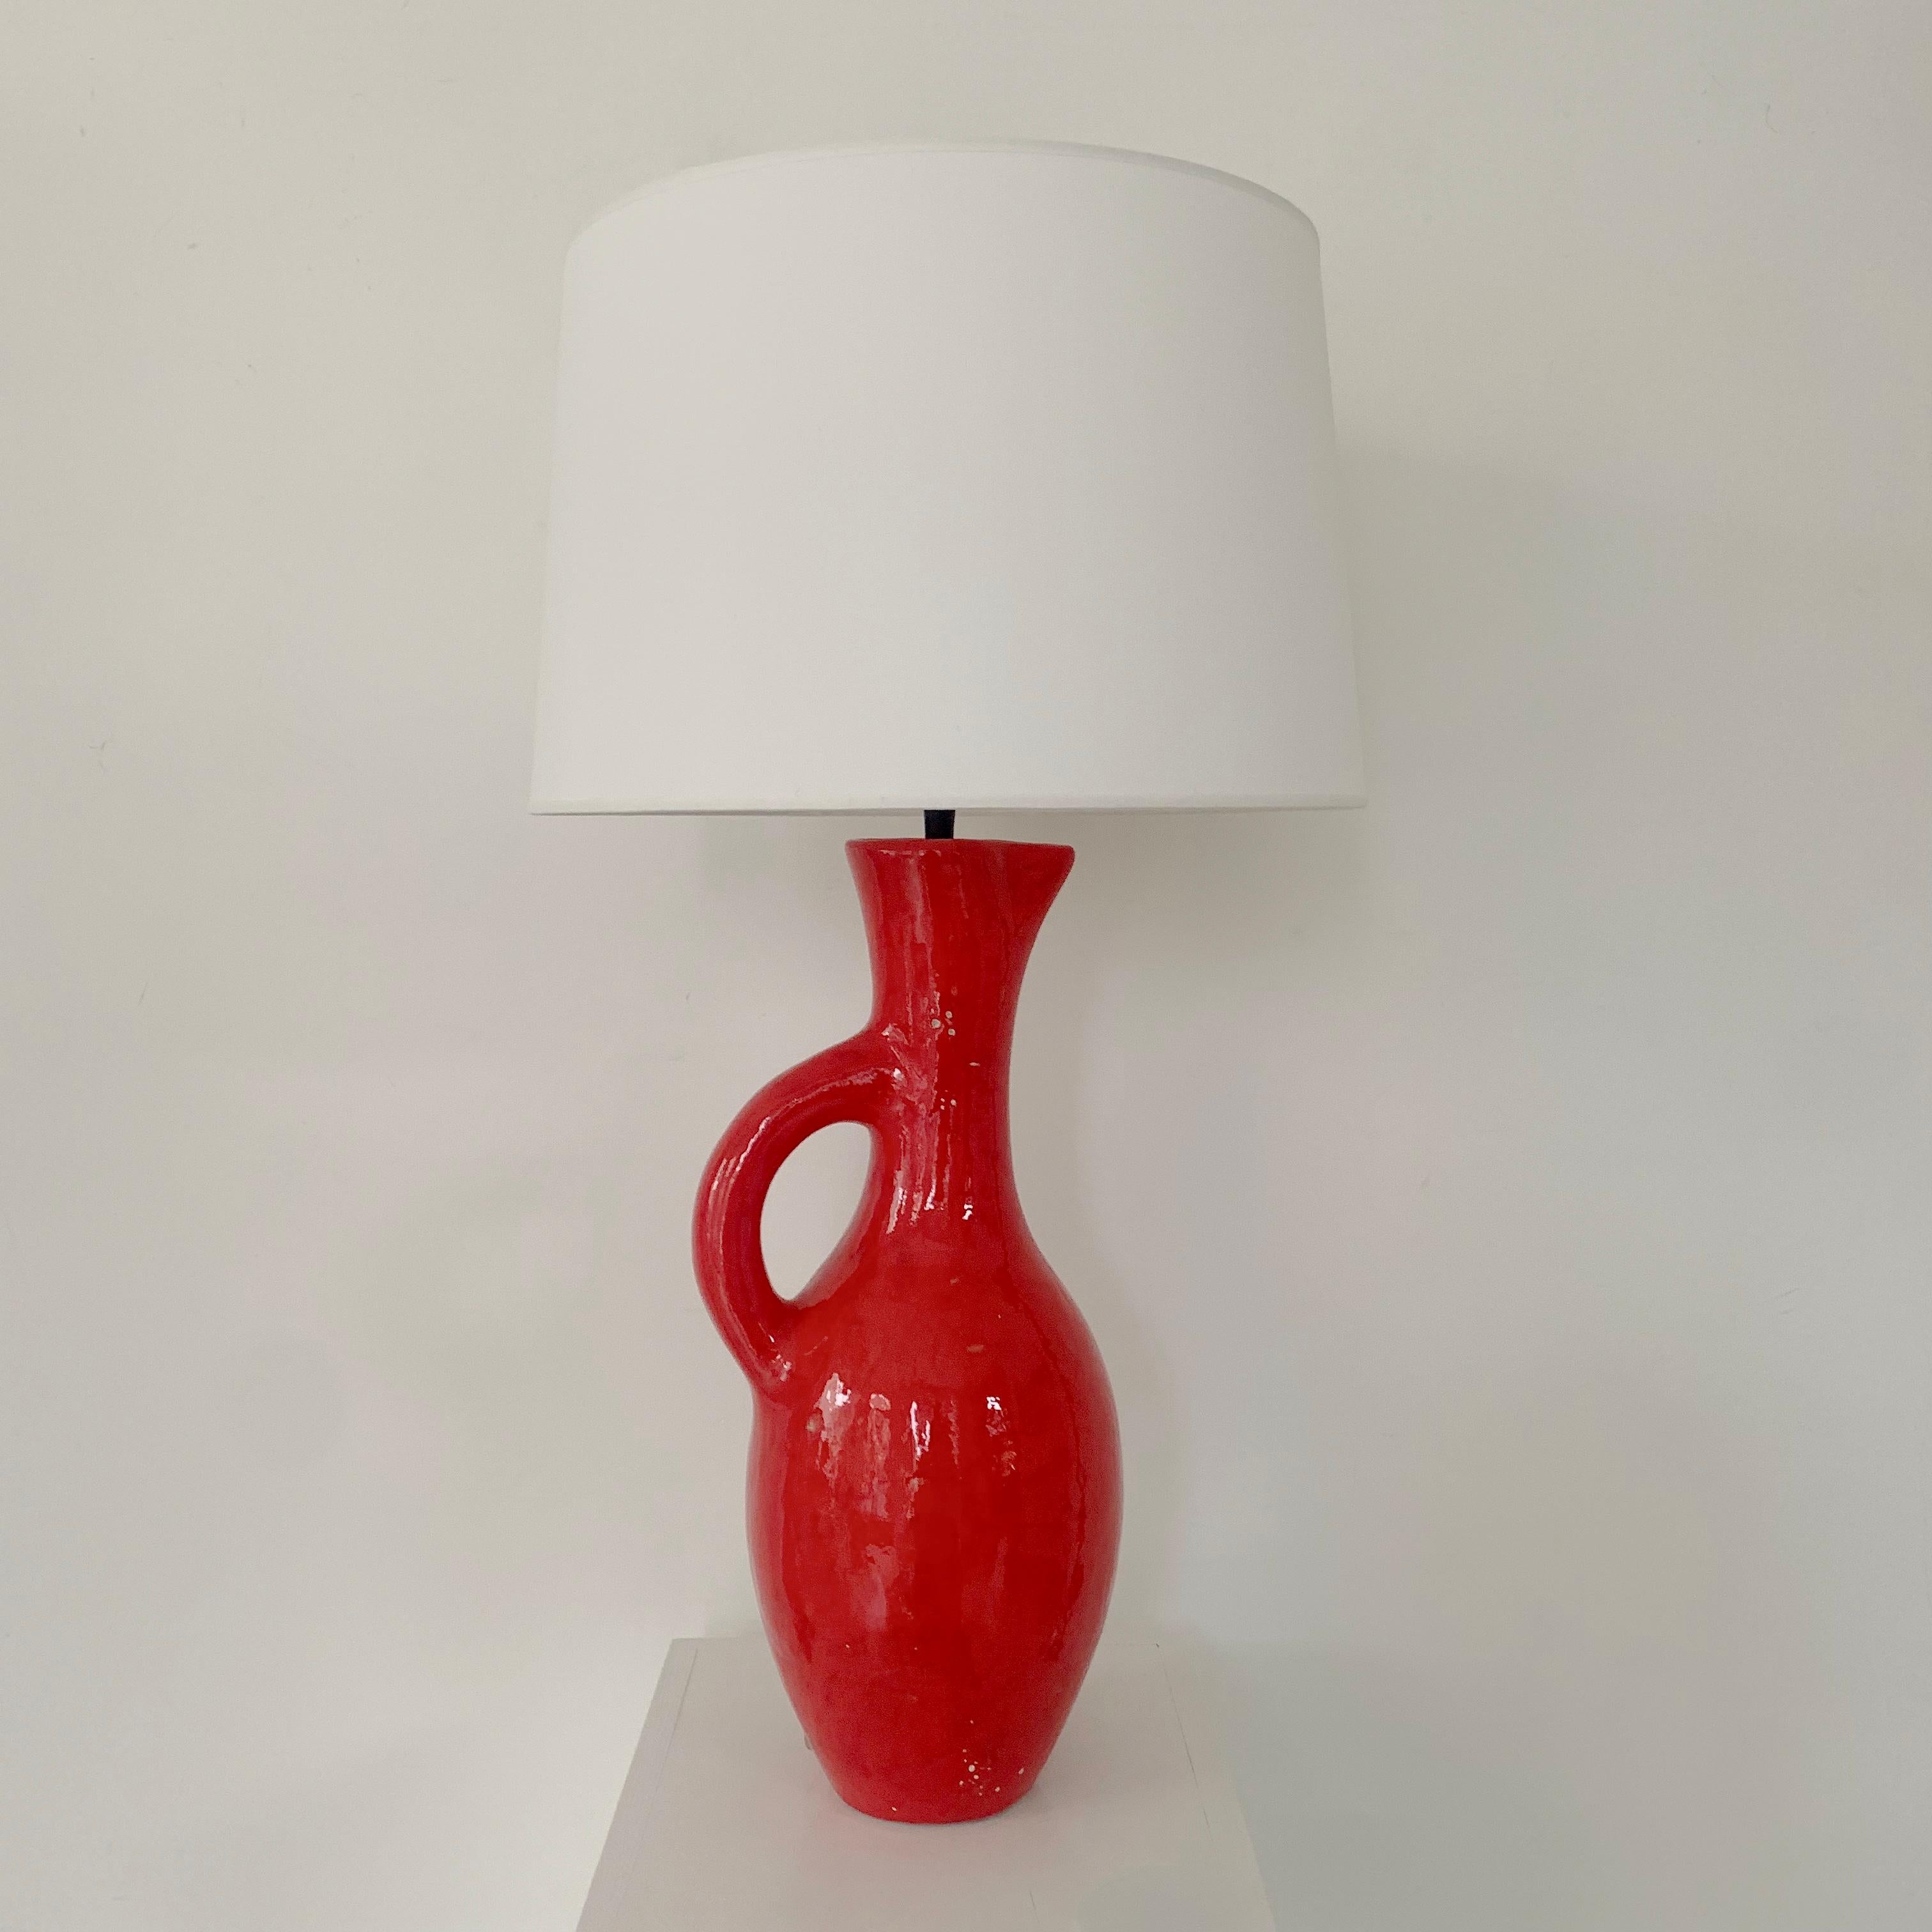 Mid-Century Modern Les Archanges/Gilbert Valentin Large Signed Table Lamp, 1950s, Vallauris.